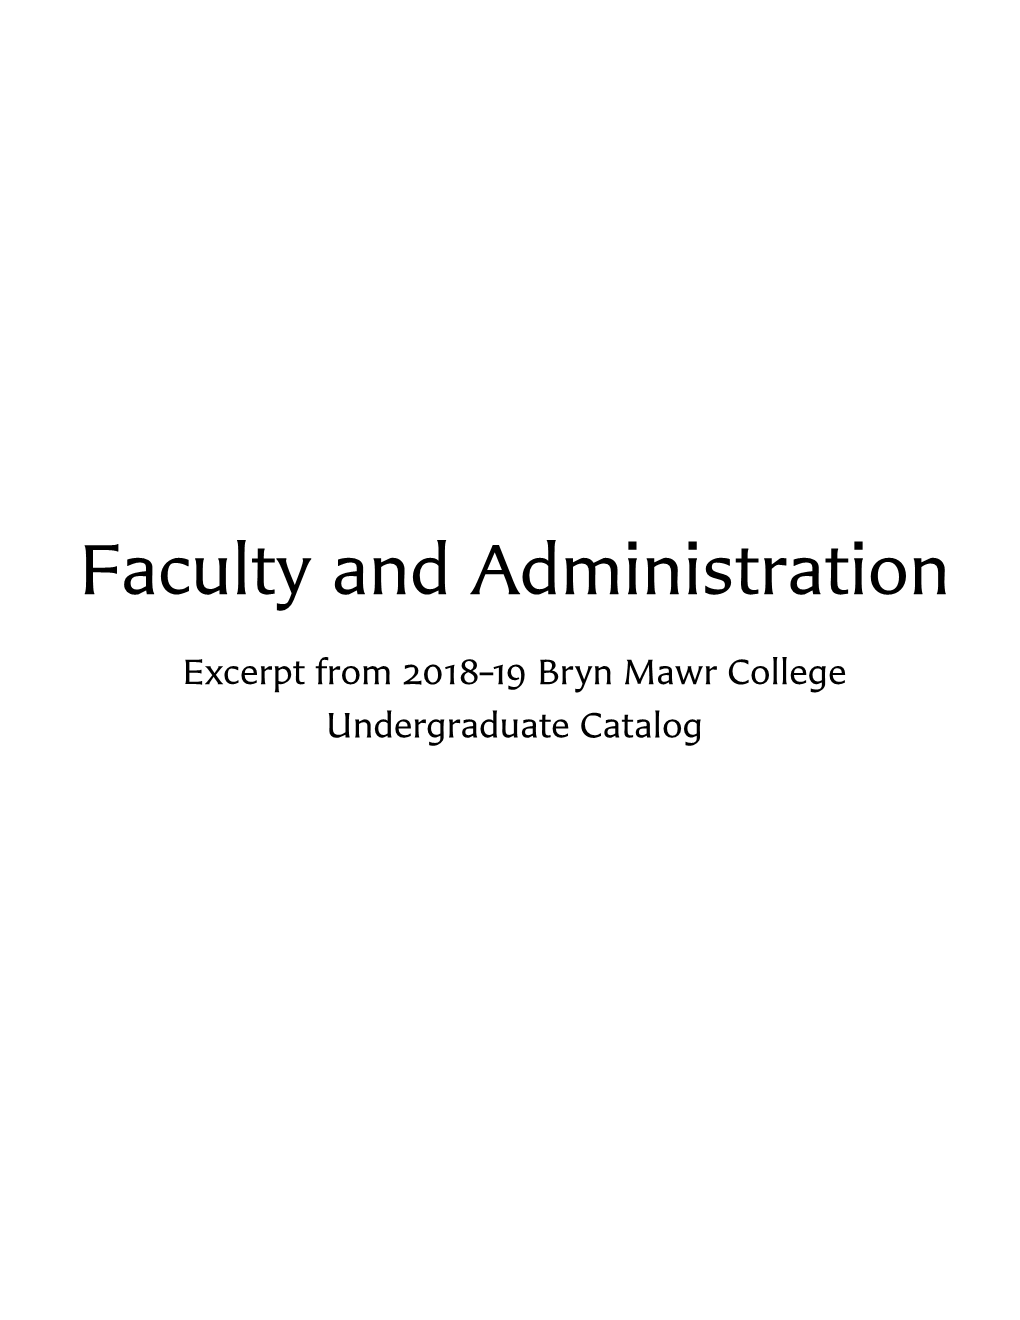 Faculty-Administration Excerpt from Catalog